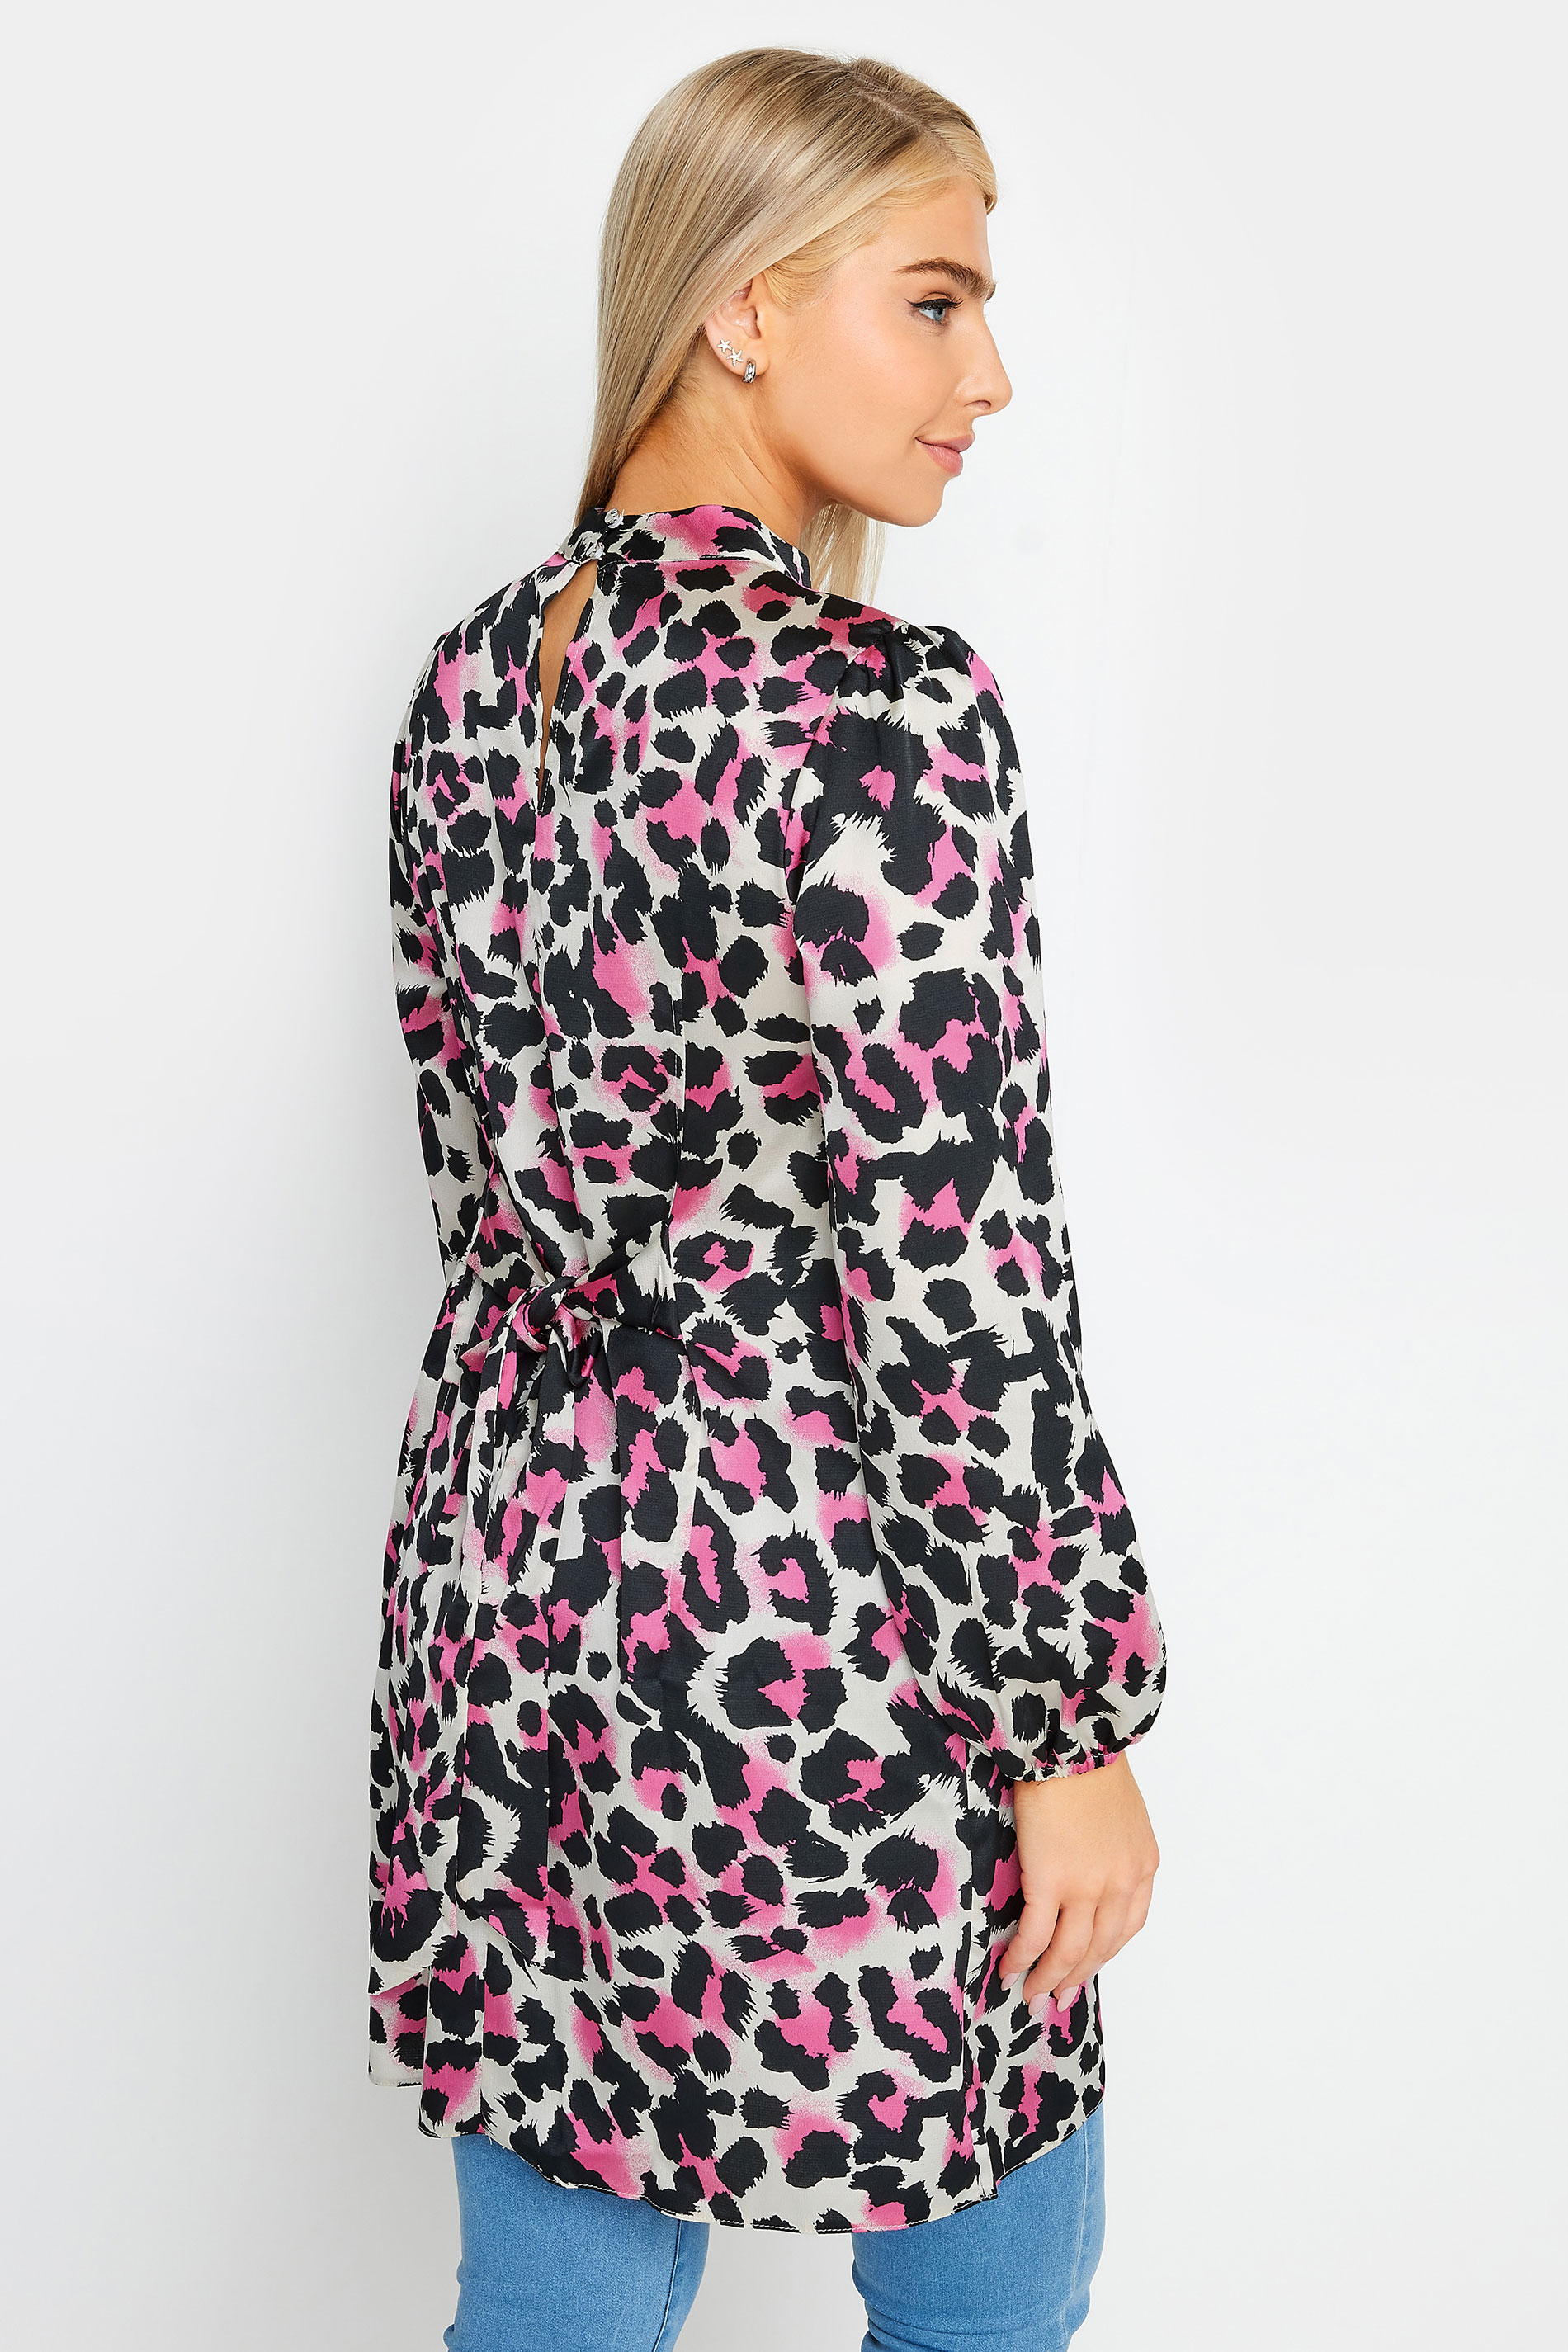 M&Co Pink Leopard Print High Neck Tunic Top | M&Co  3